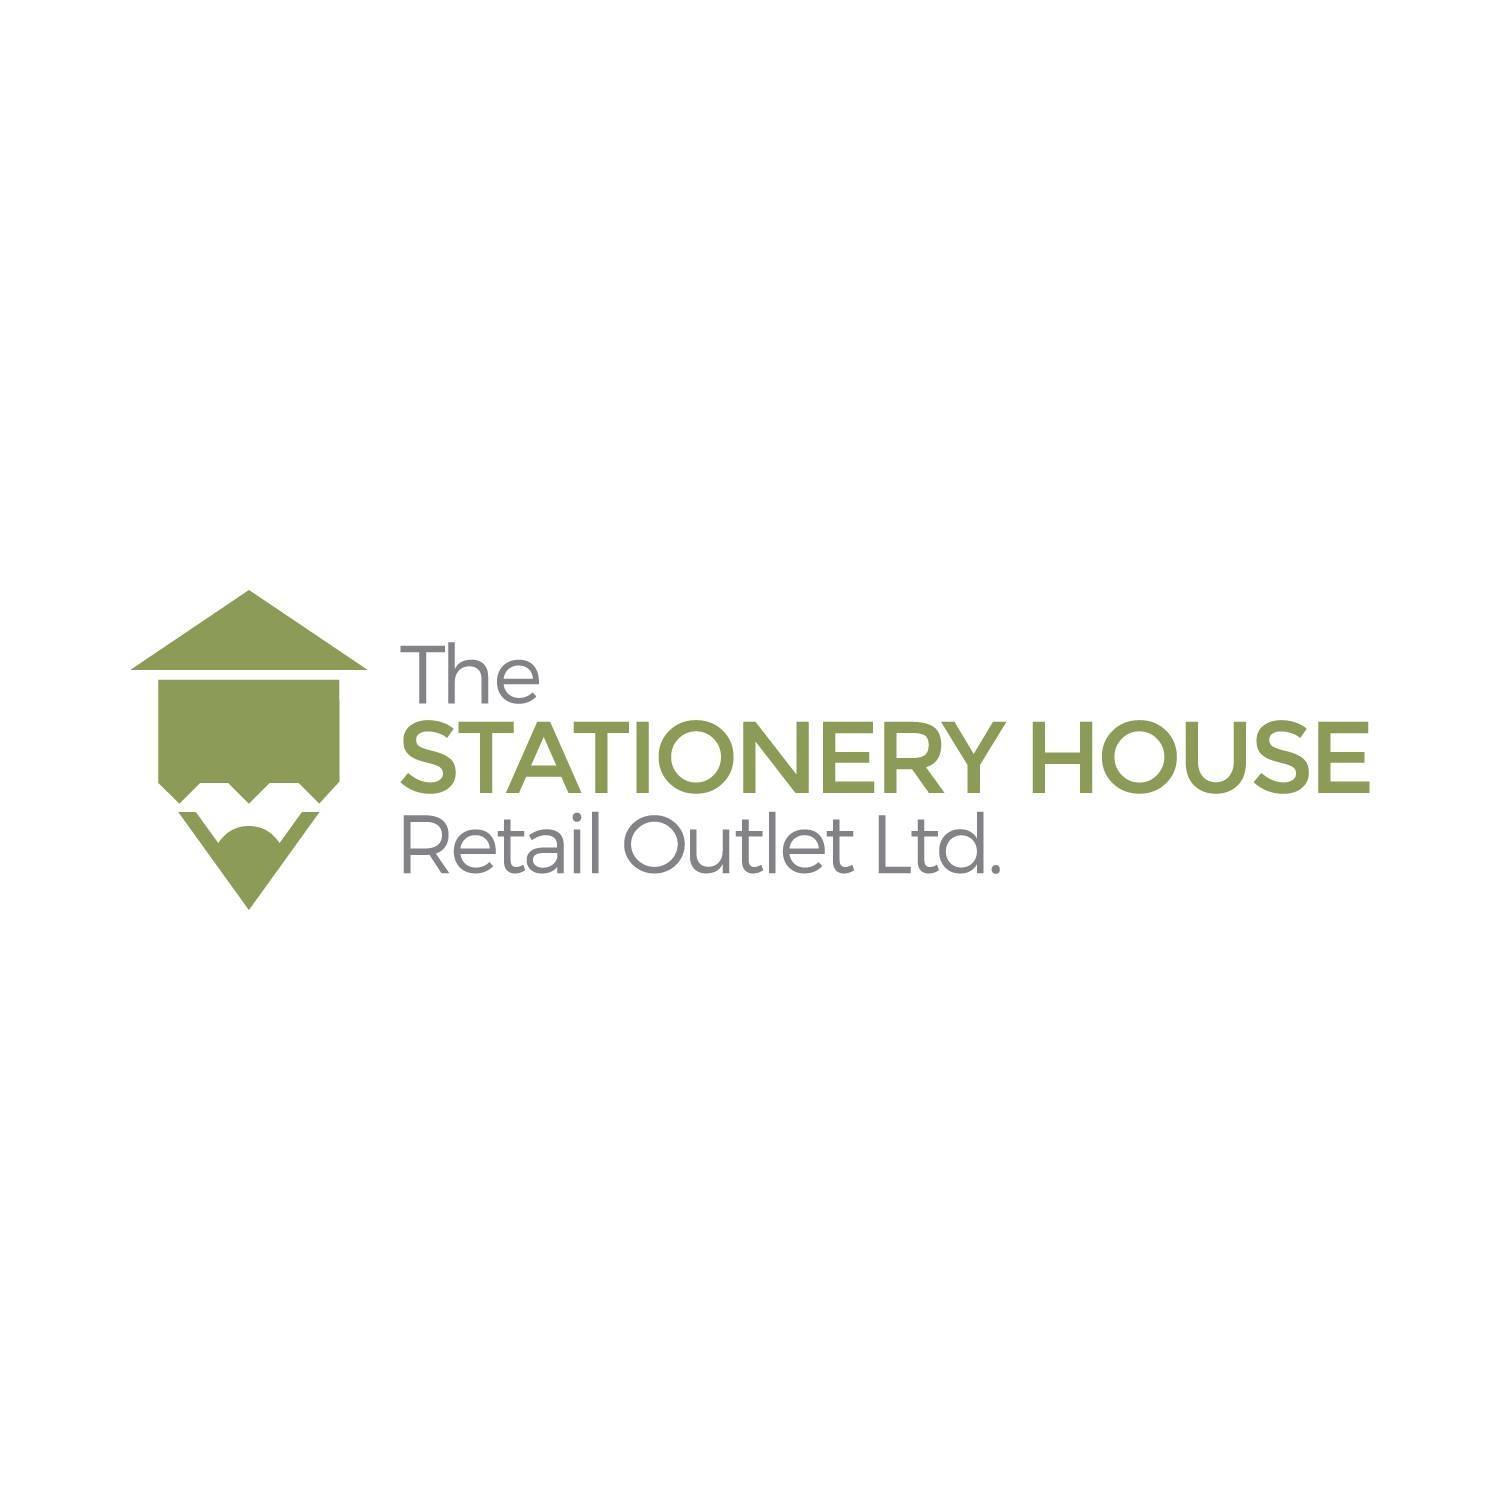 The Stationery House Retail Outlet Ltd - Belize, Central America